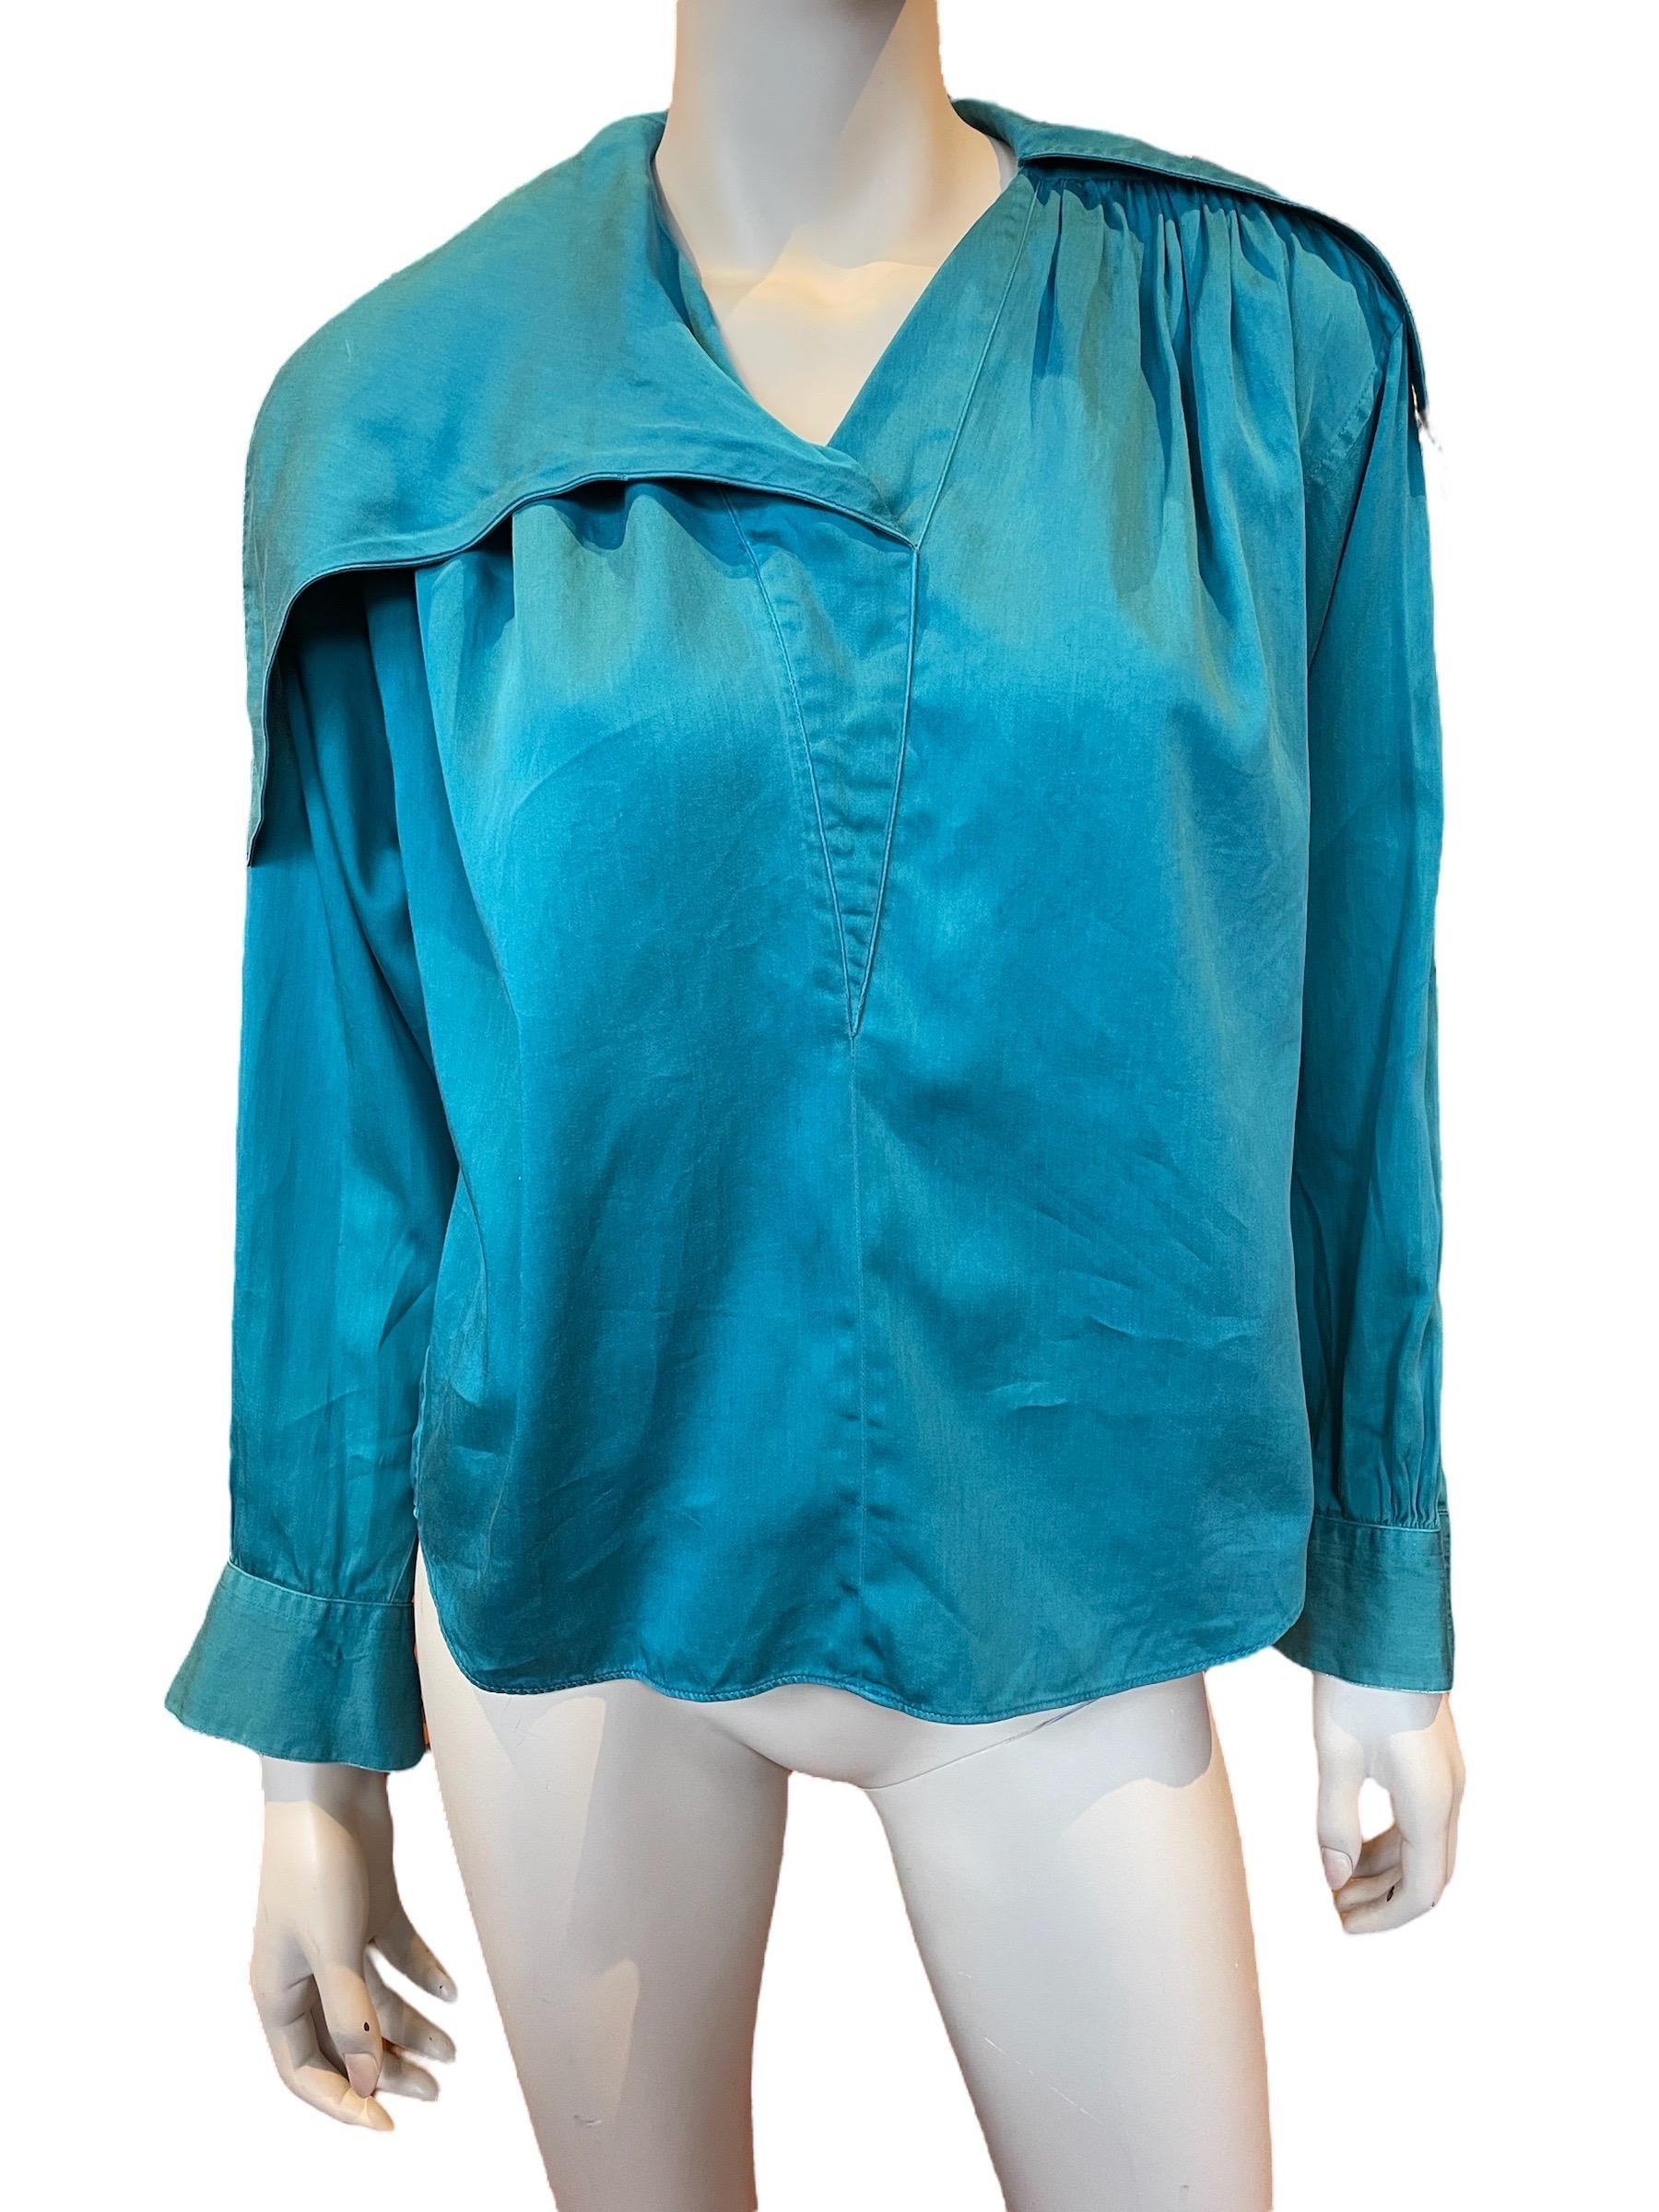 1980s Teal Kenzo Paris Cotton Asymmetrical Shirt  In Good Condition For Sale In Greenport, NY